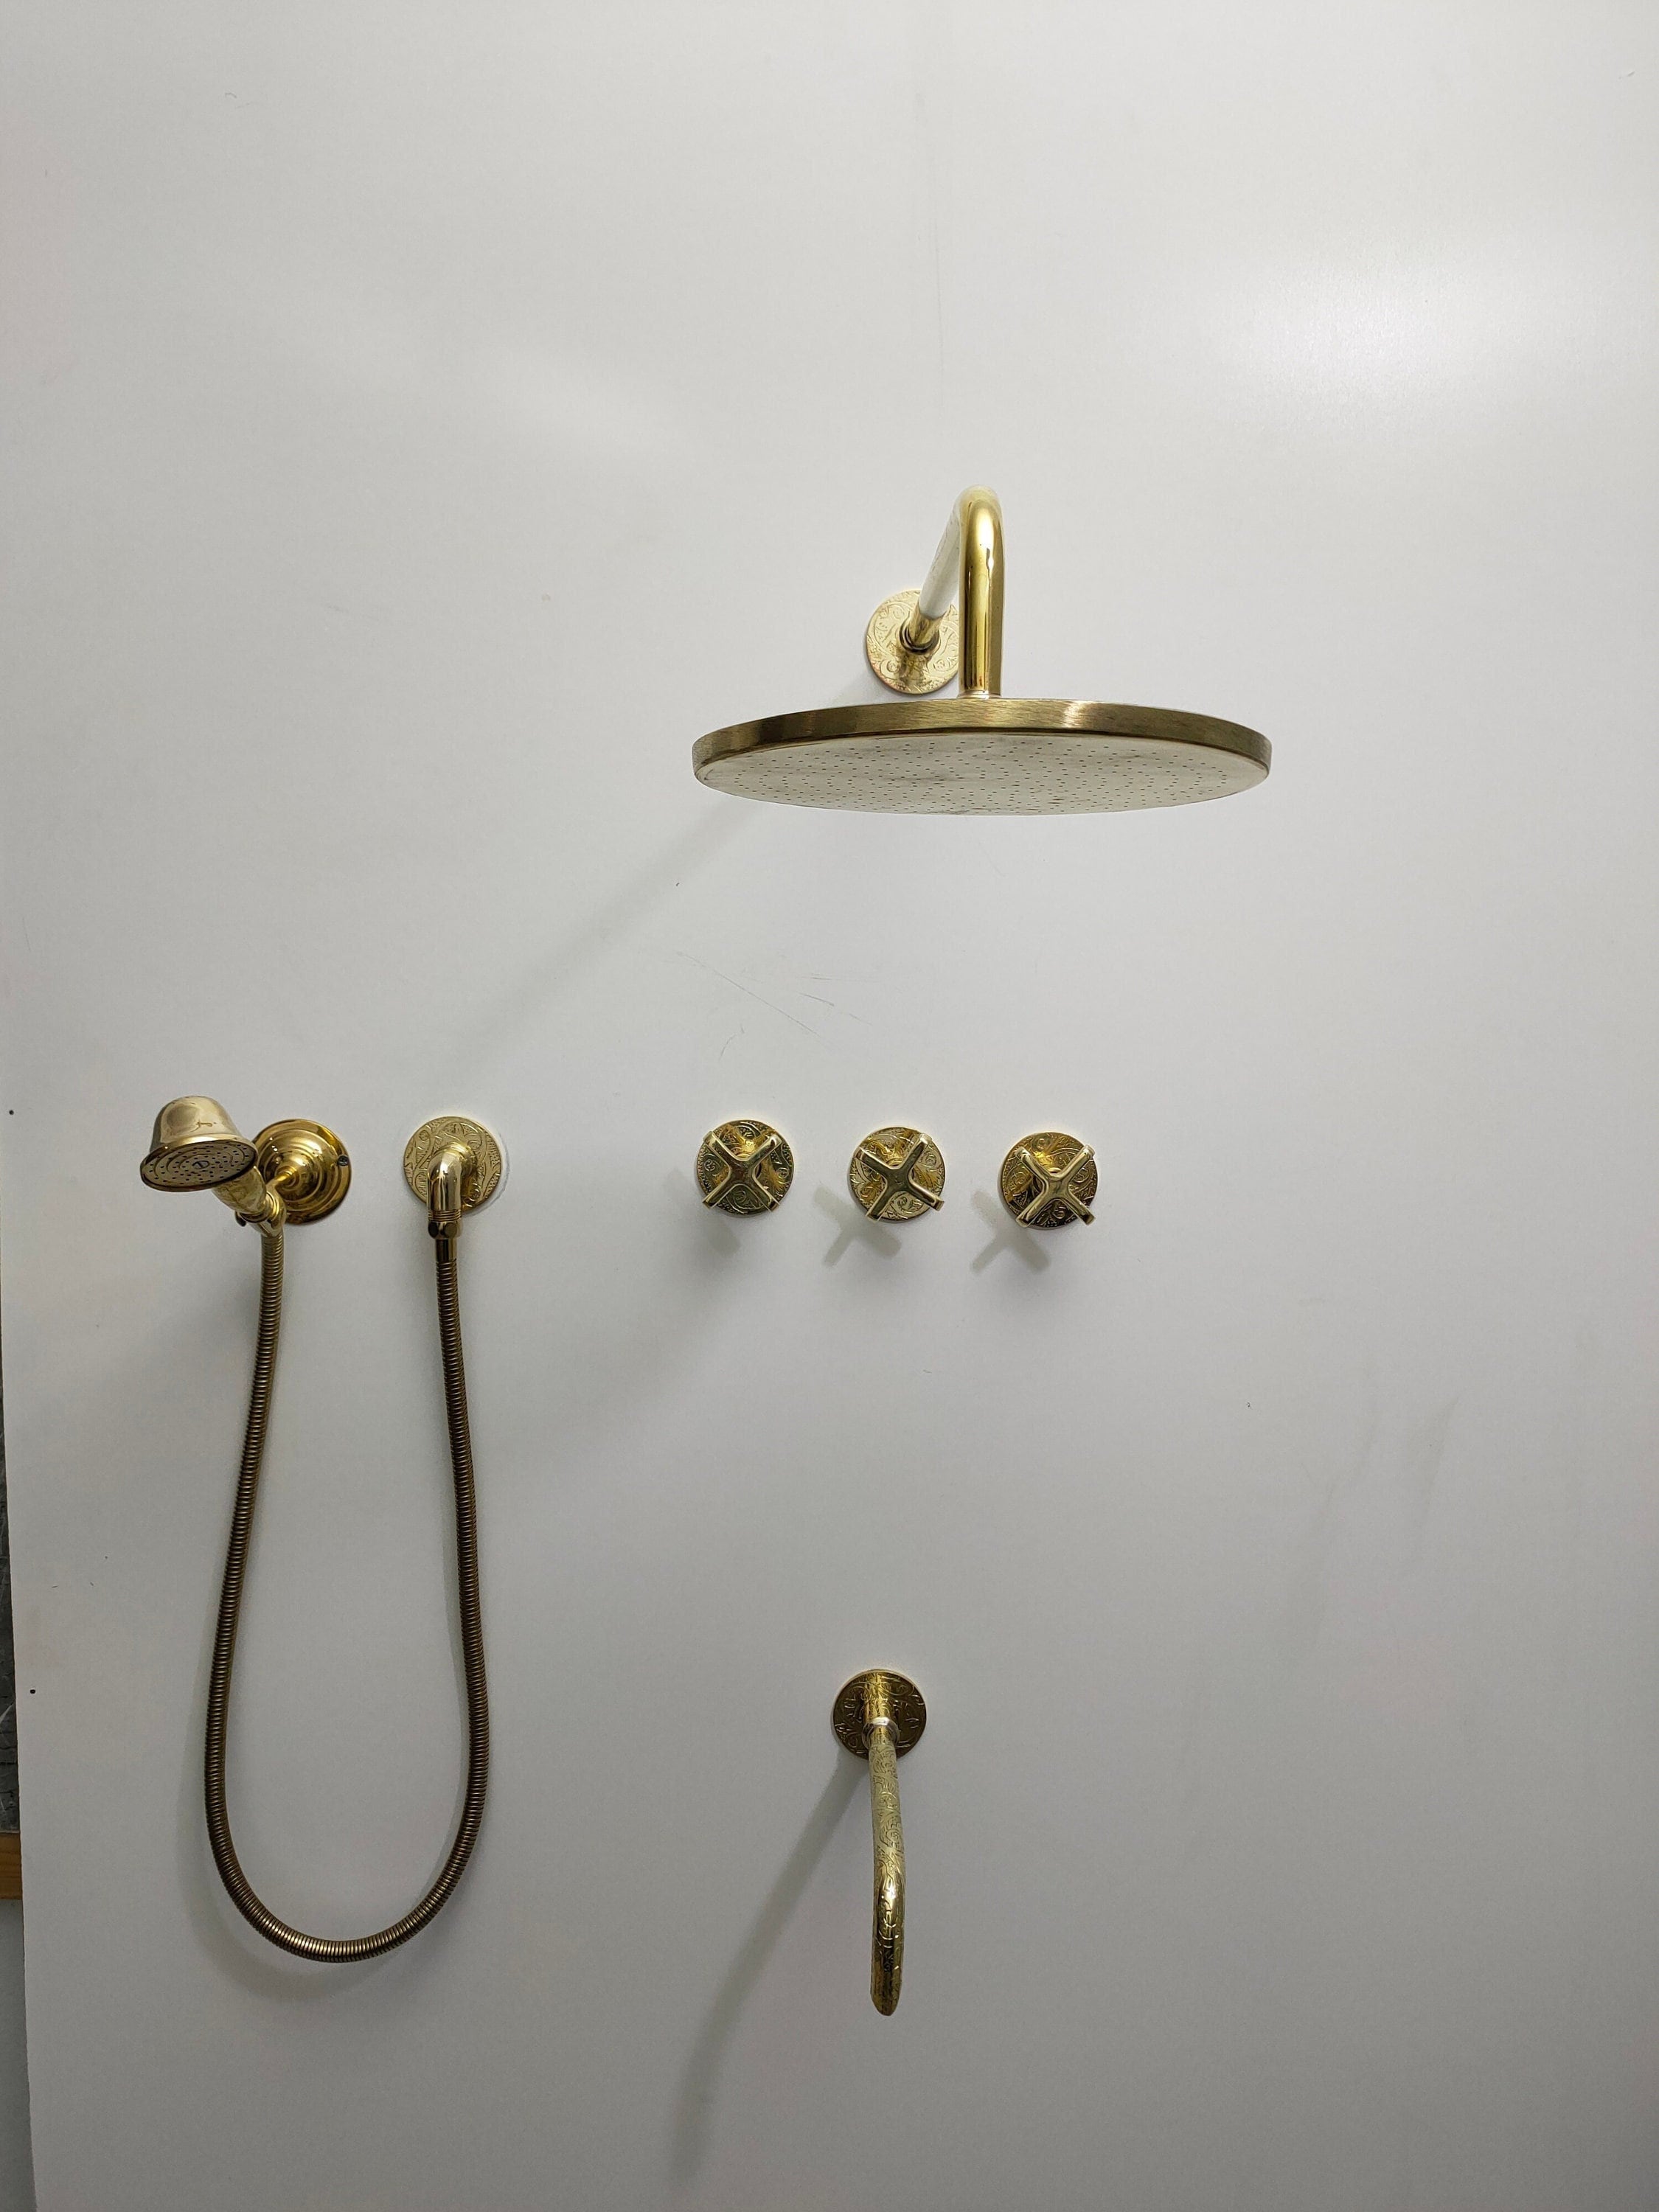 Solid Brass Exposed Shower Set